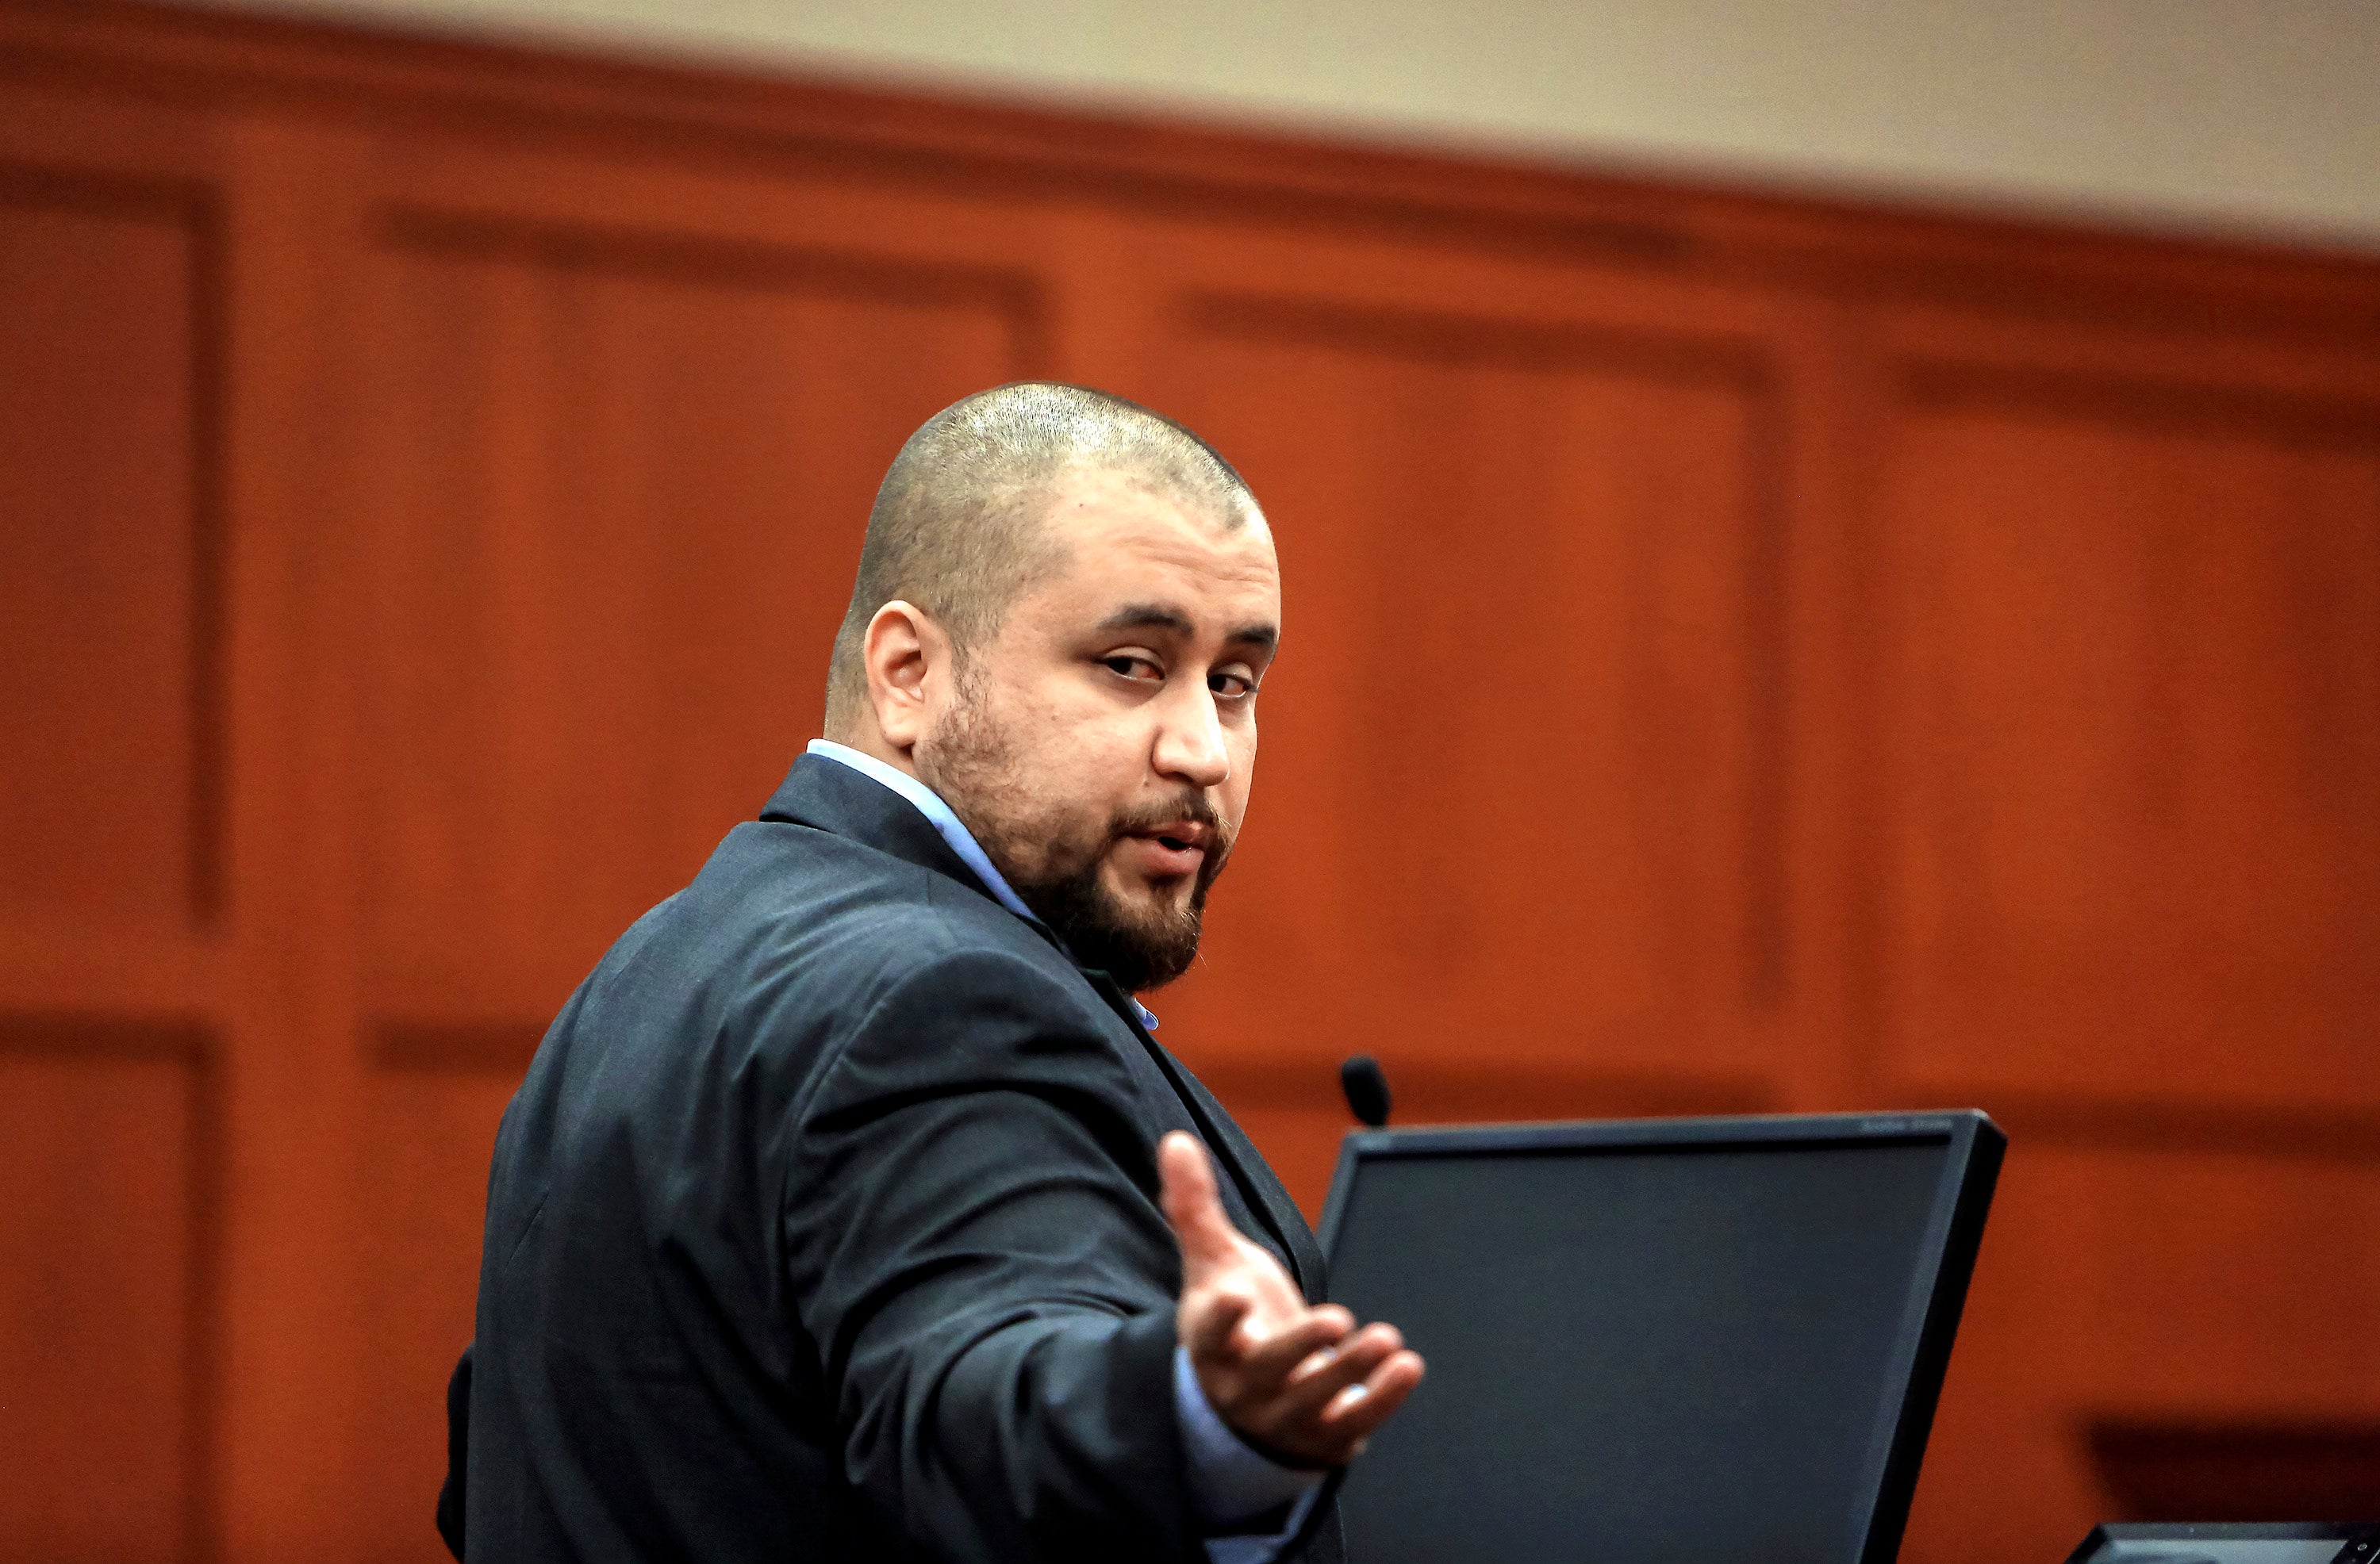 Man Who Shot At George Zimmerman Sentenced To 20 Years In Prison